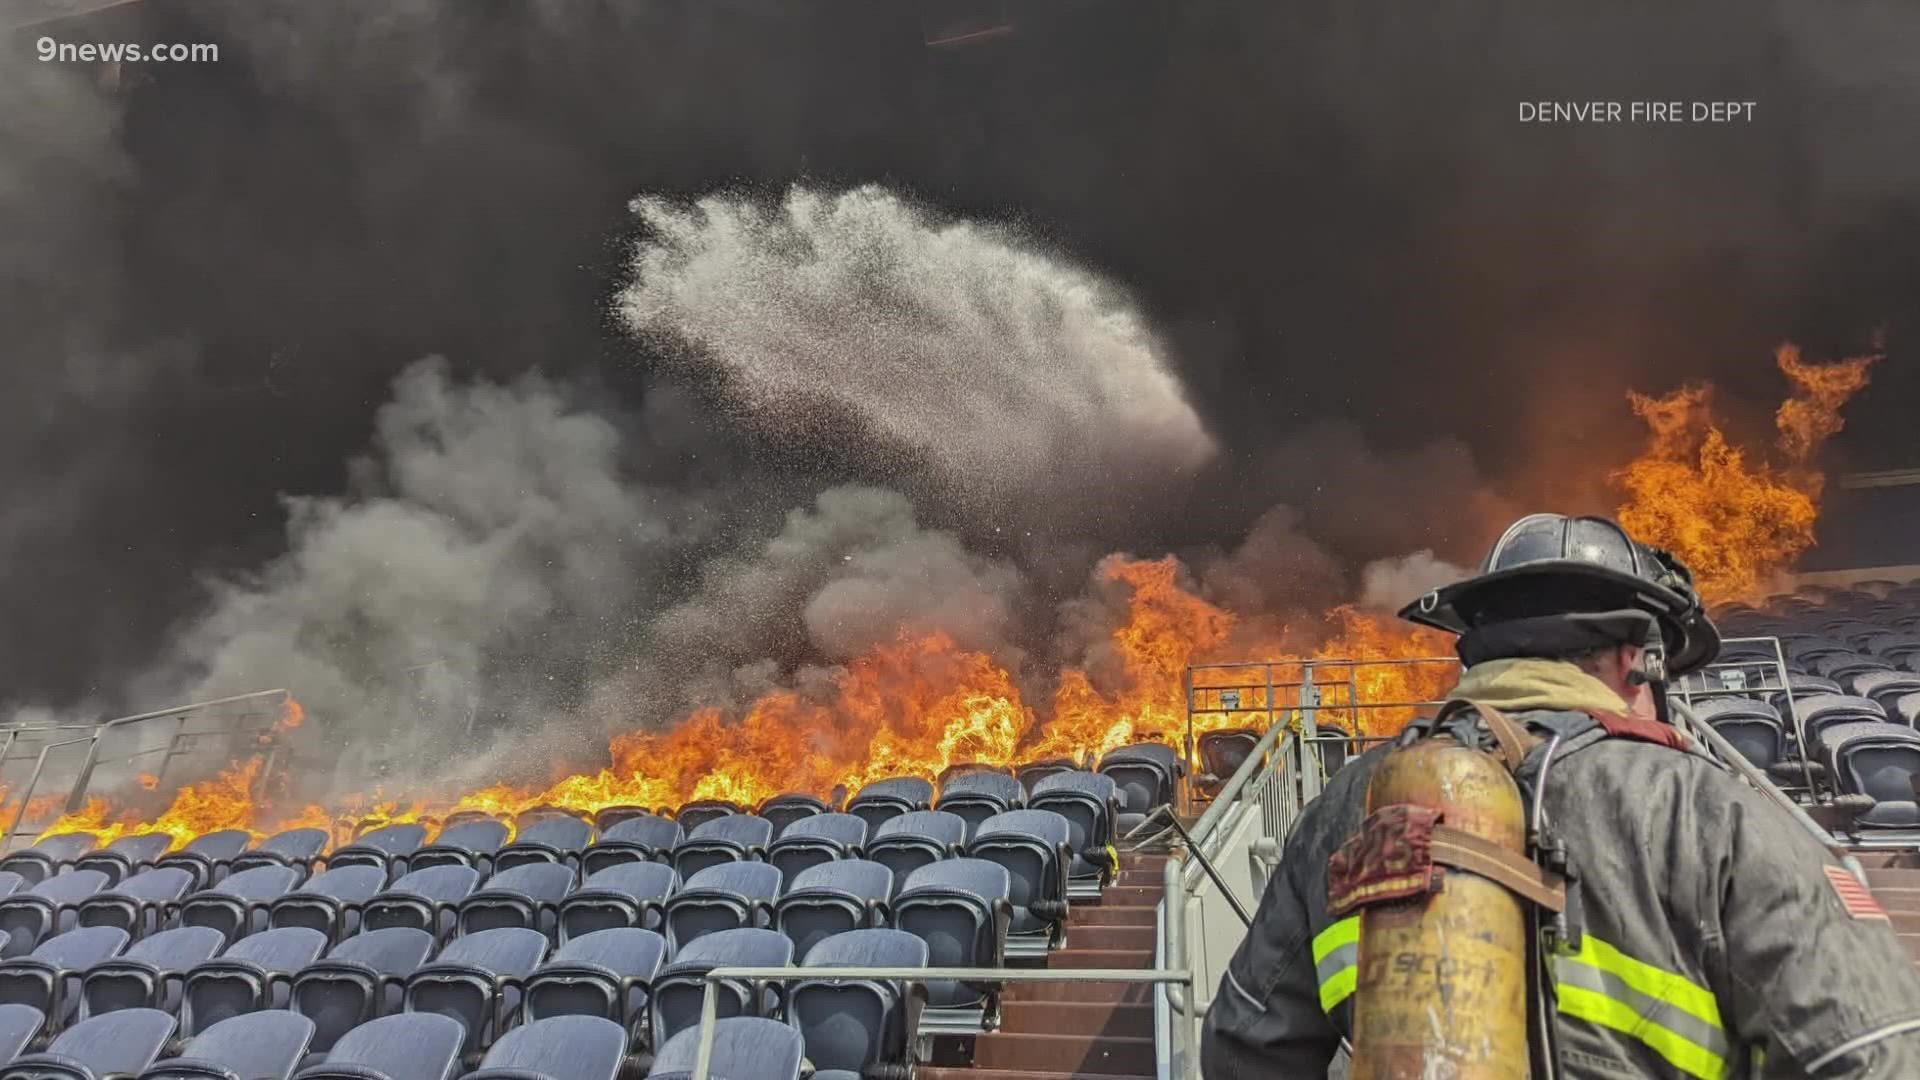 The fire at Empower Field forced staff to move around events scheduled at the Denver Broncos' stadium, including a high school prom.